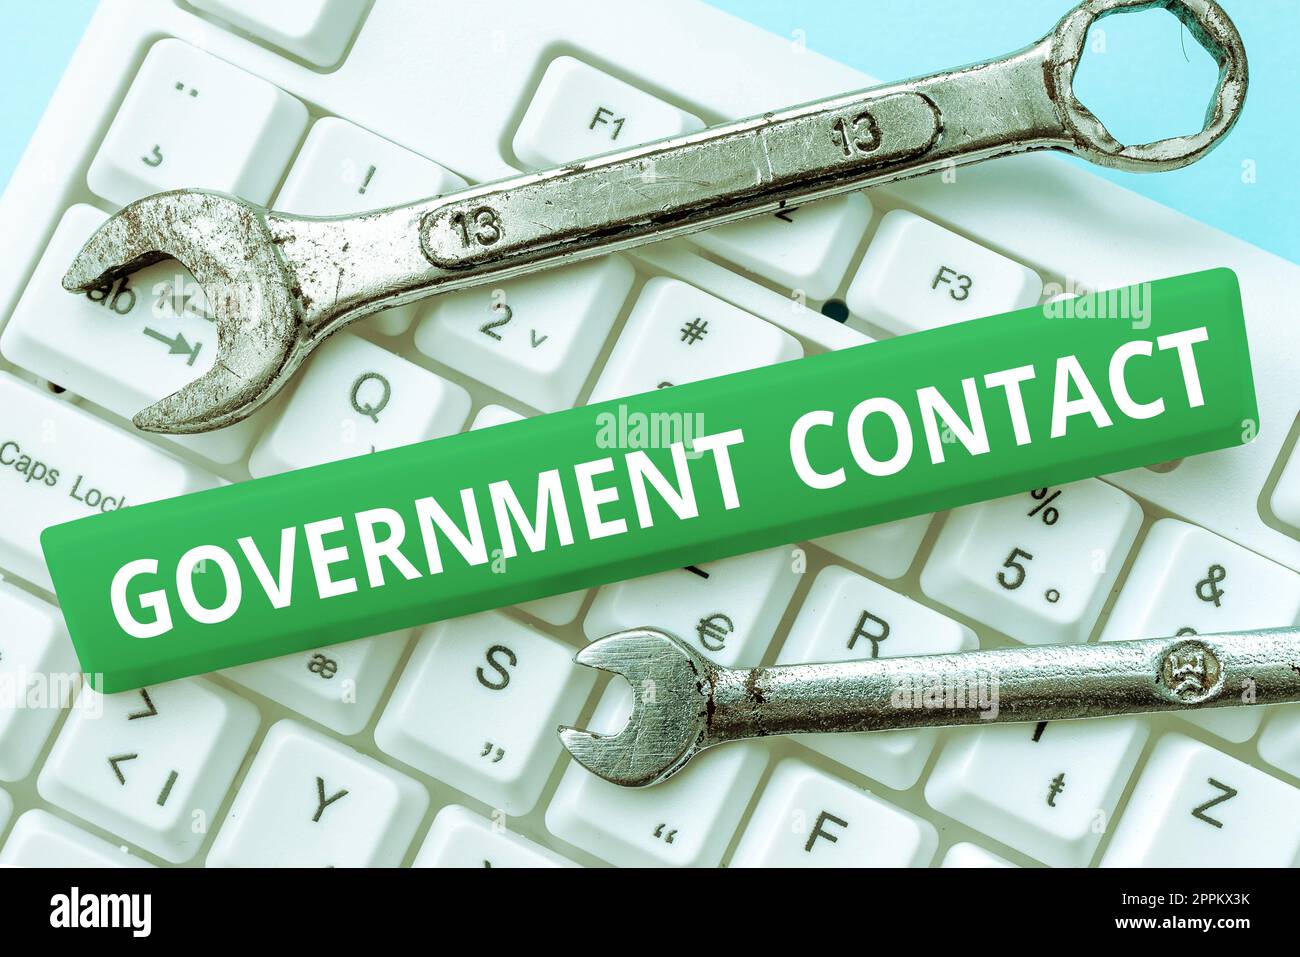 Writing displaying text Government Contact. Business showcase debt security issued by a government to support spending Stock Photo